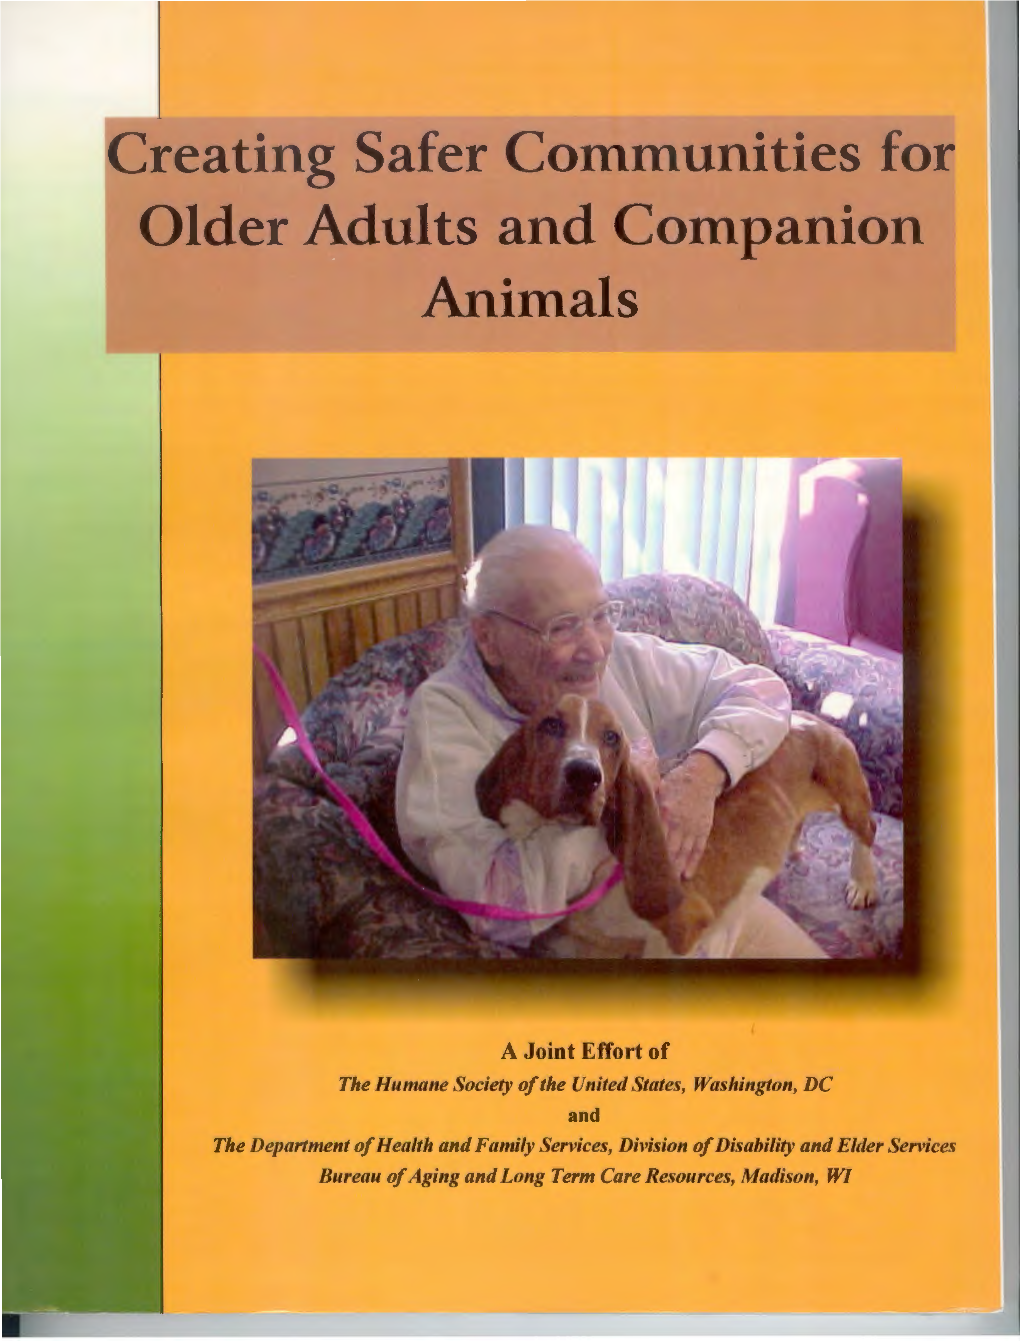 Creating Safer Communities for Older Adults & Companion Animals